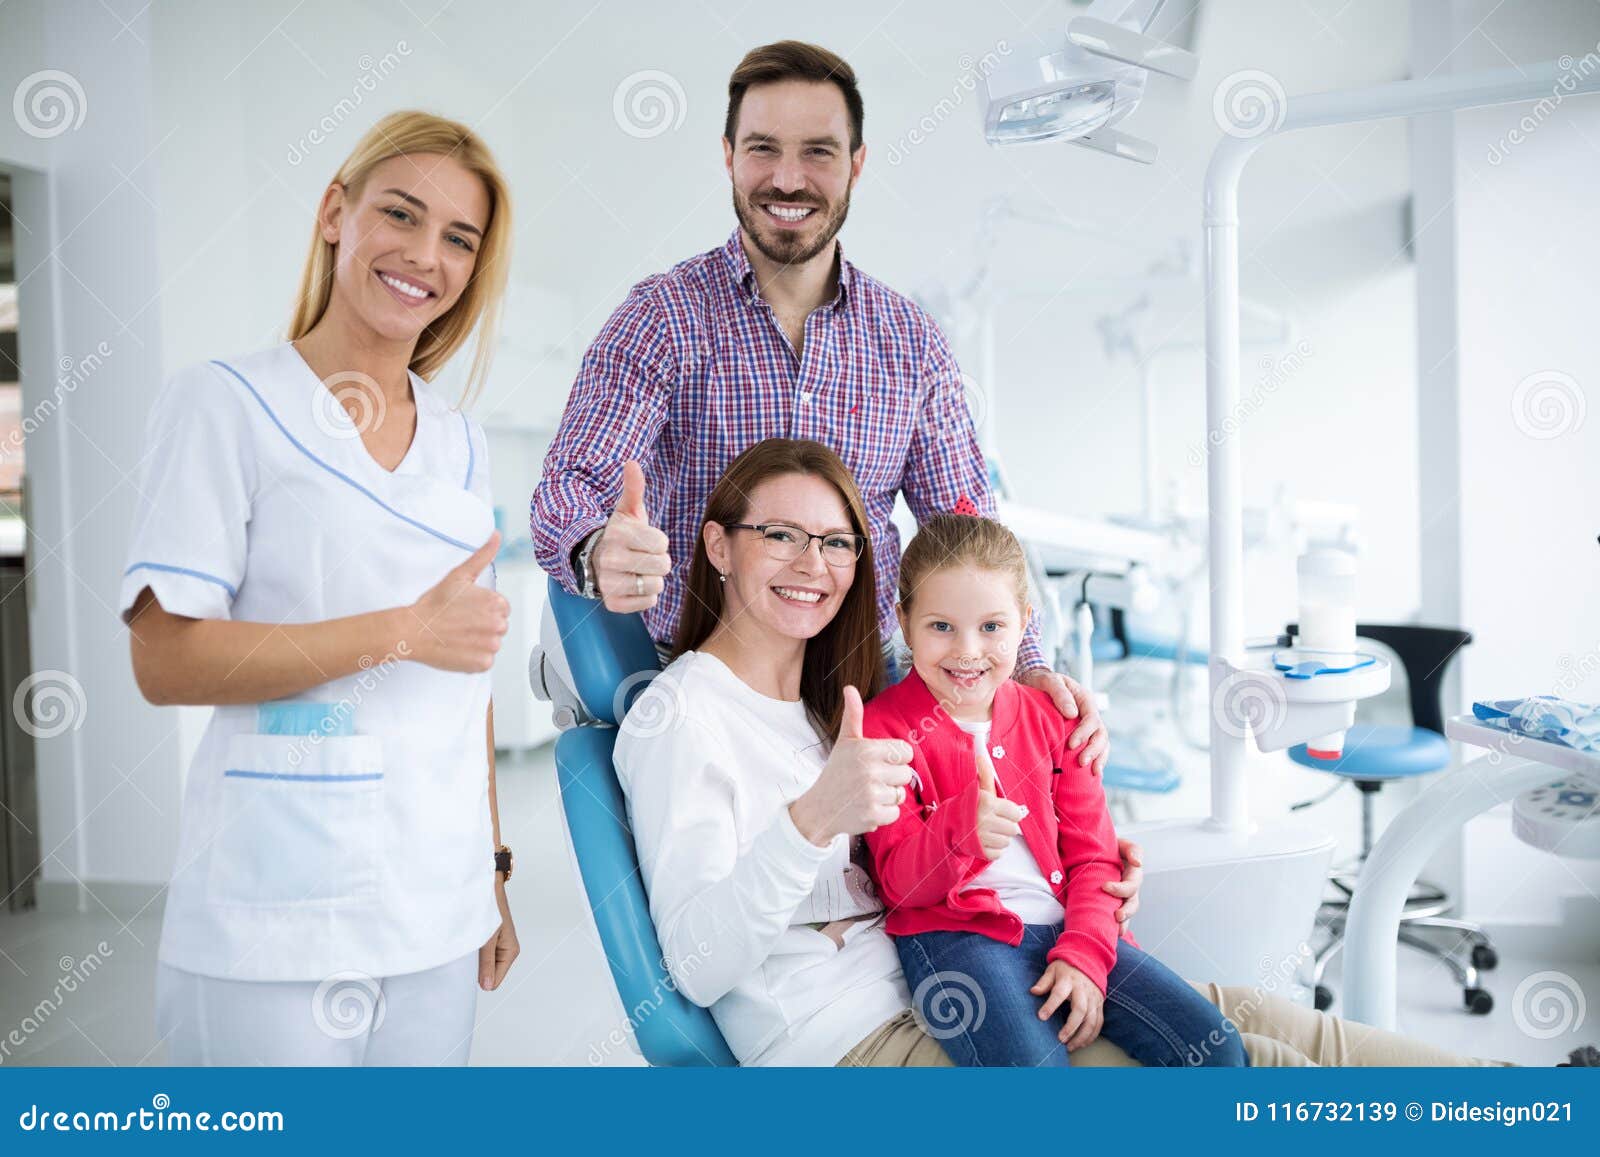 happy family with a smiling young dentist